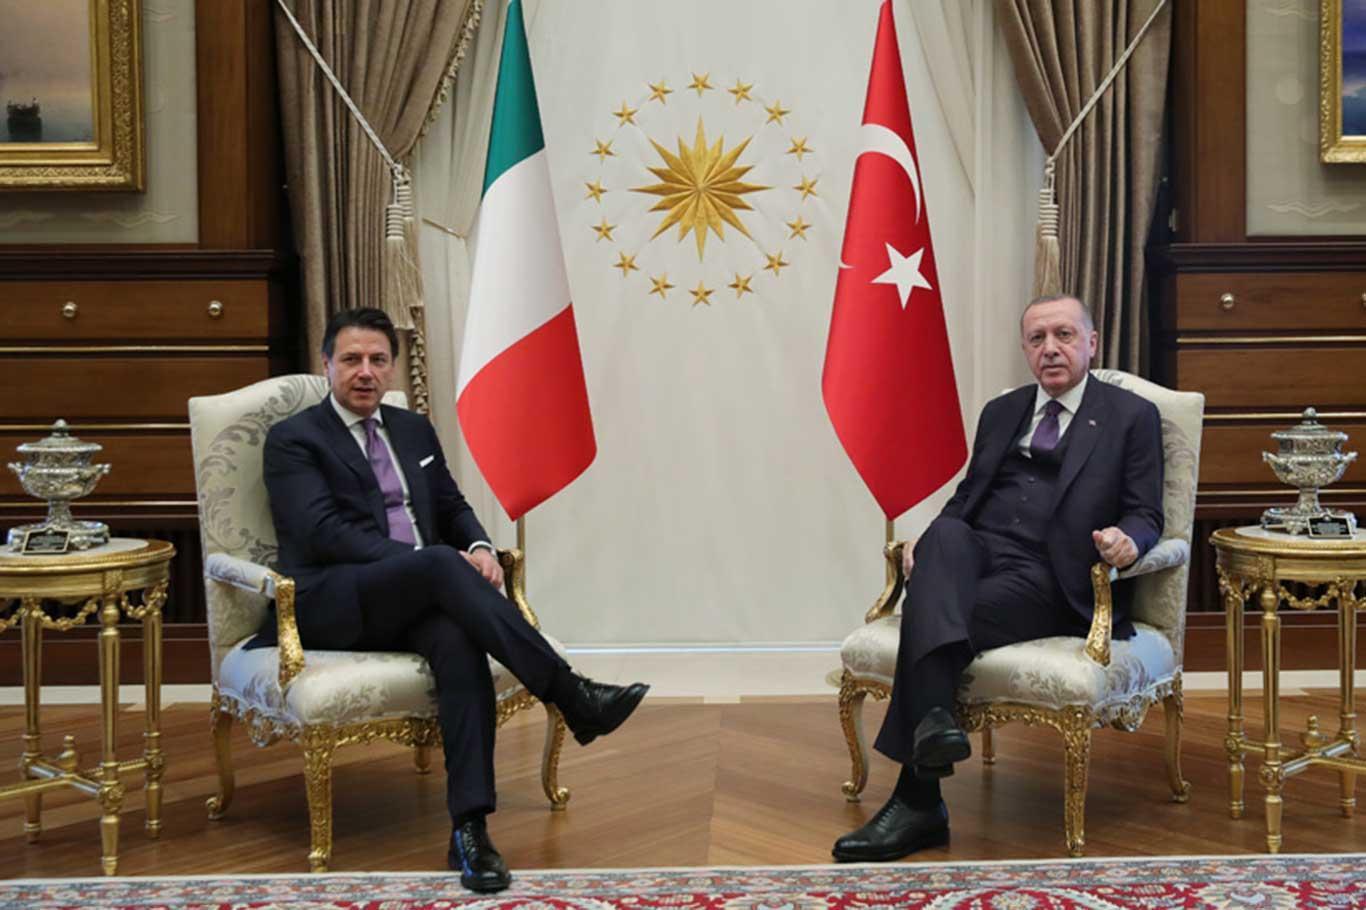 Erdoğan meets with Prime Minister Conte of Italy